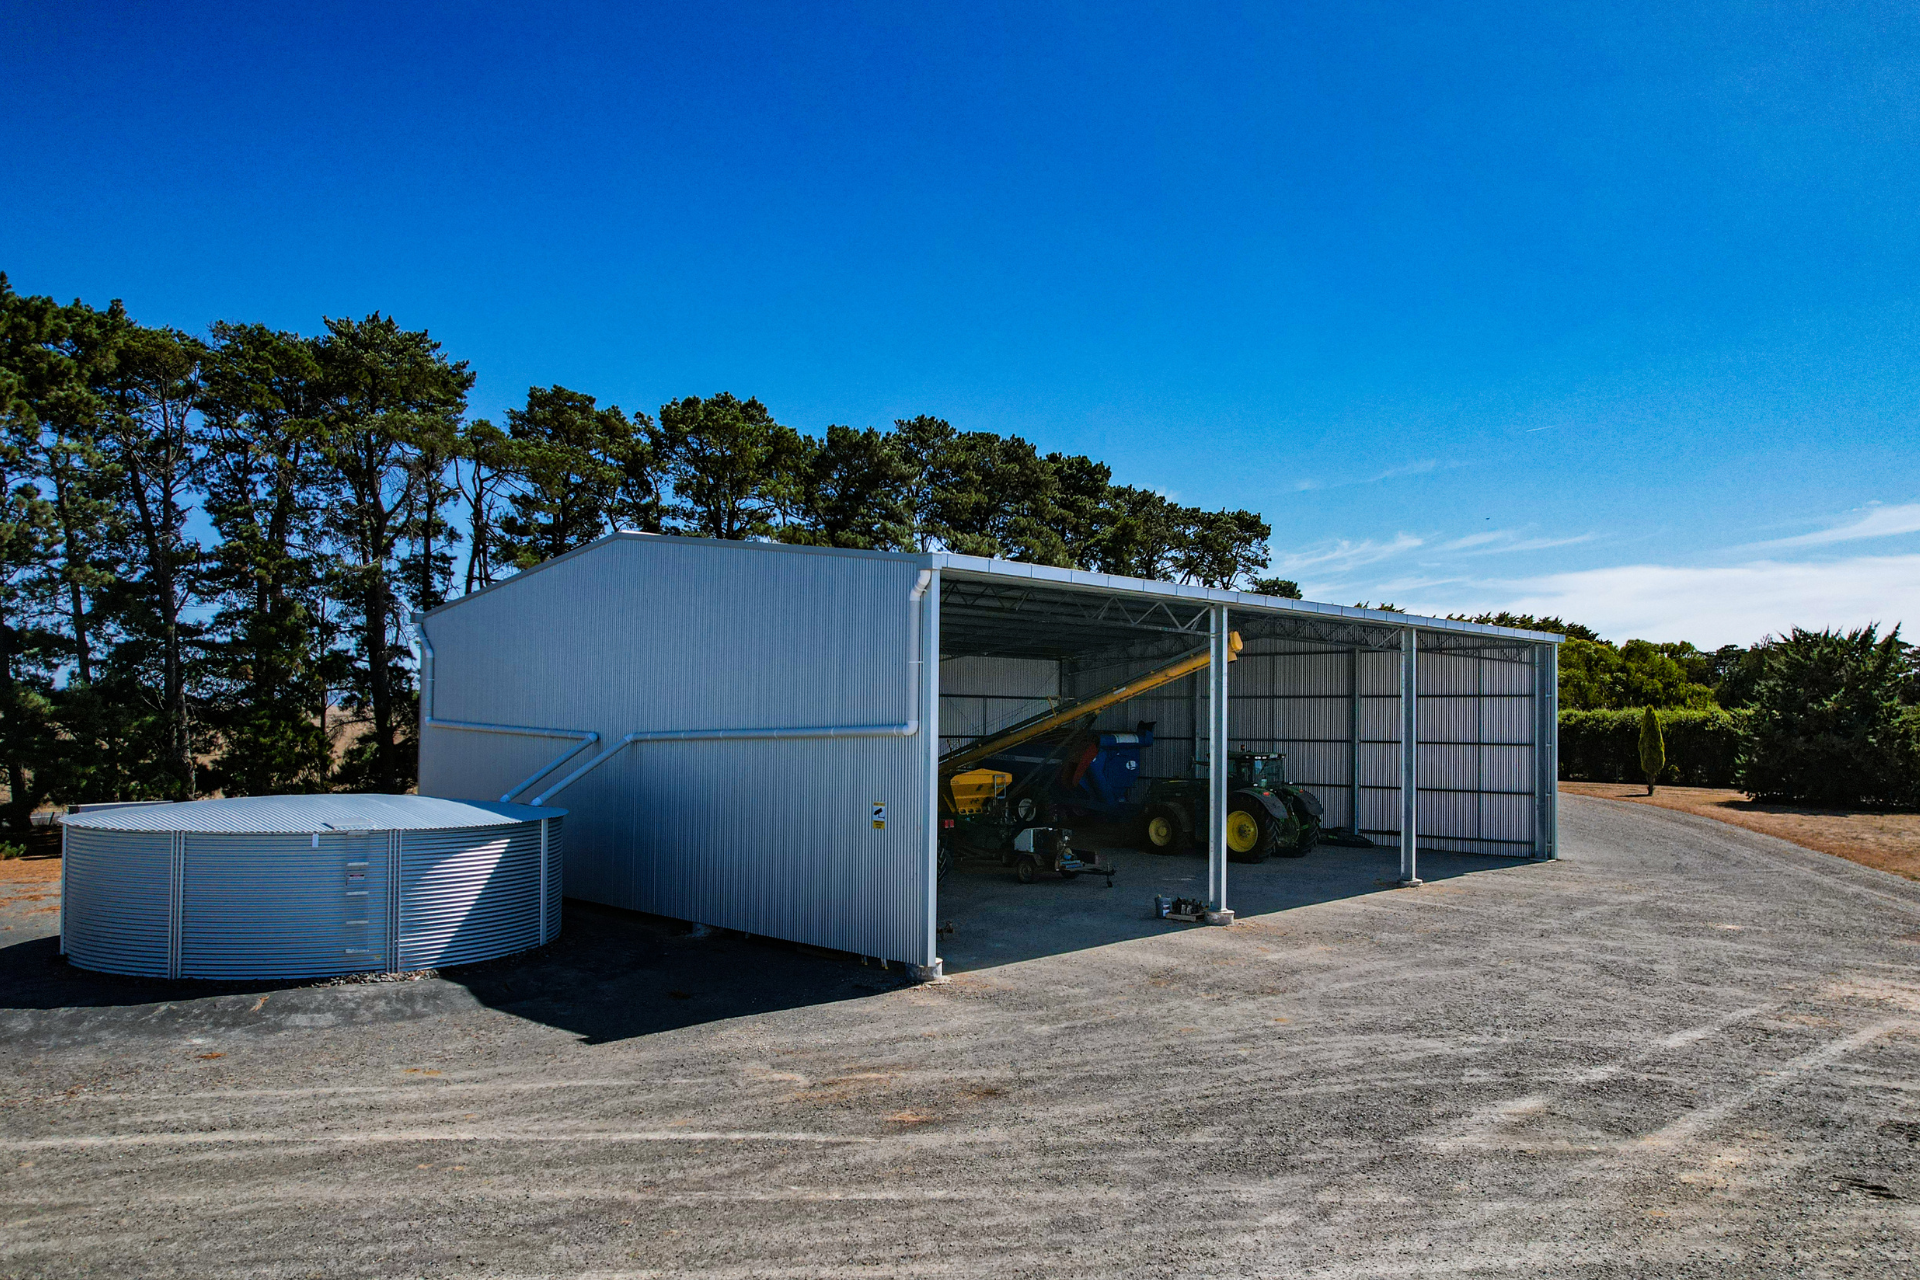 A 24m x 18m x 6m machinery shed at Willaura VIC